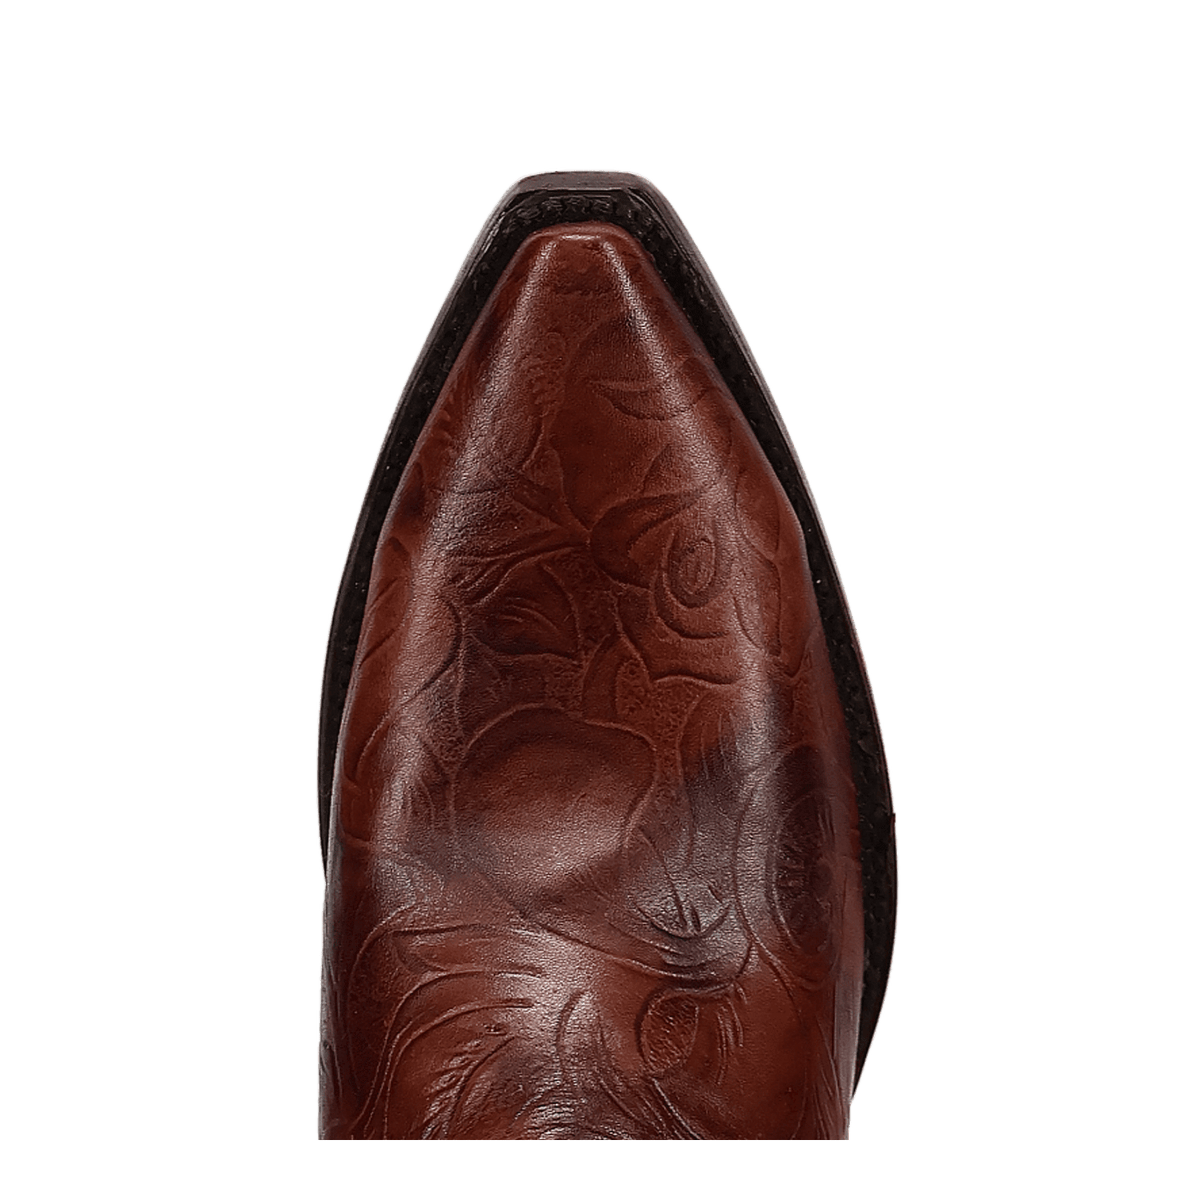 RODEO HAIR ON LEATHER BOOT Image